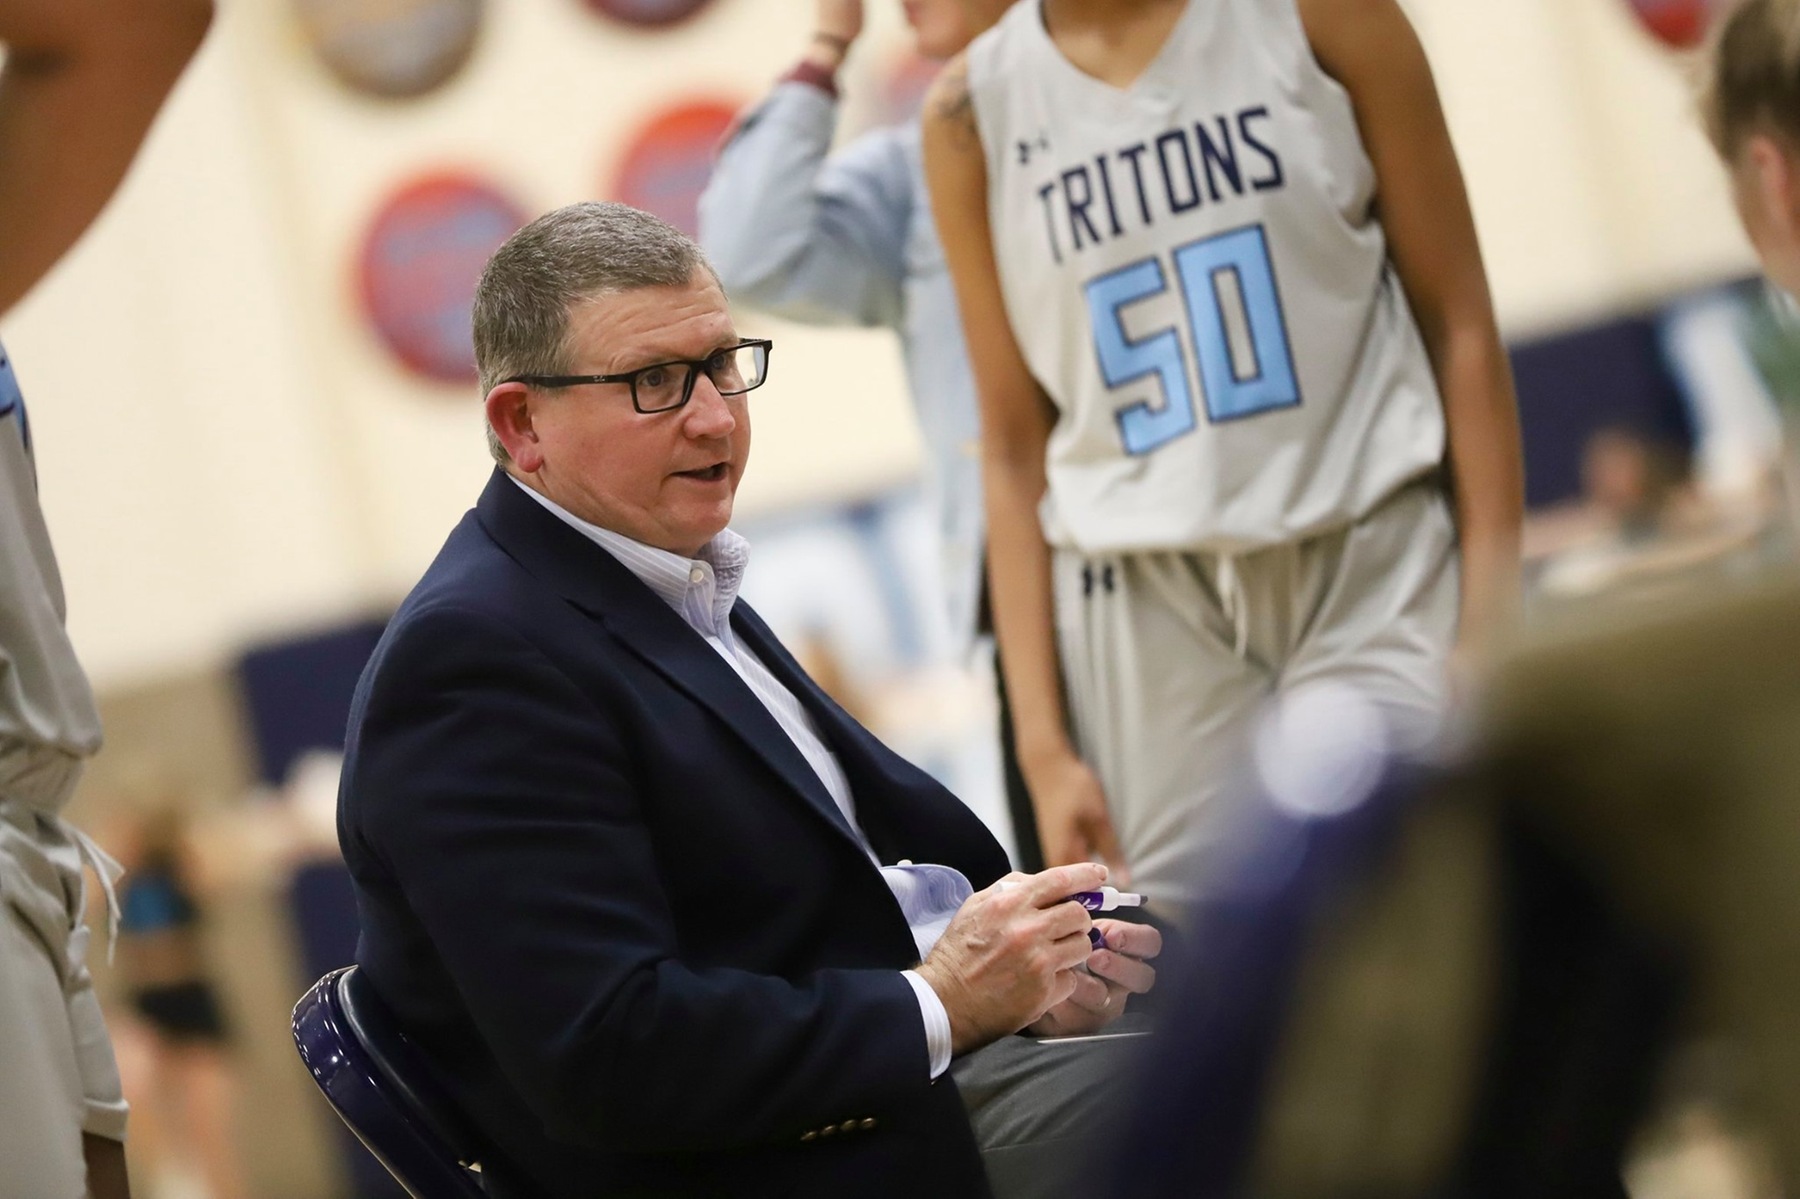 Kruger resigns after four seasons with Tritons